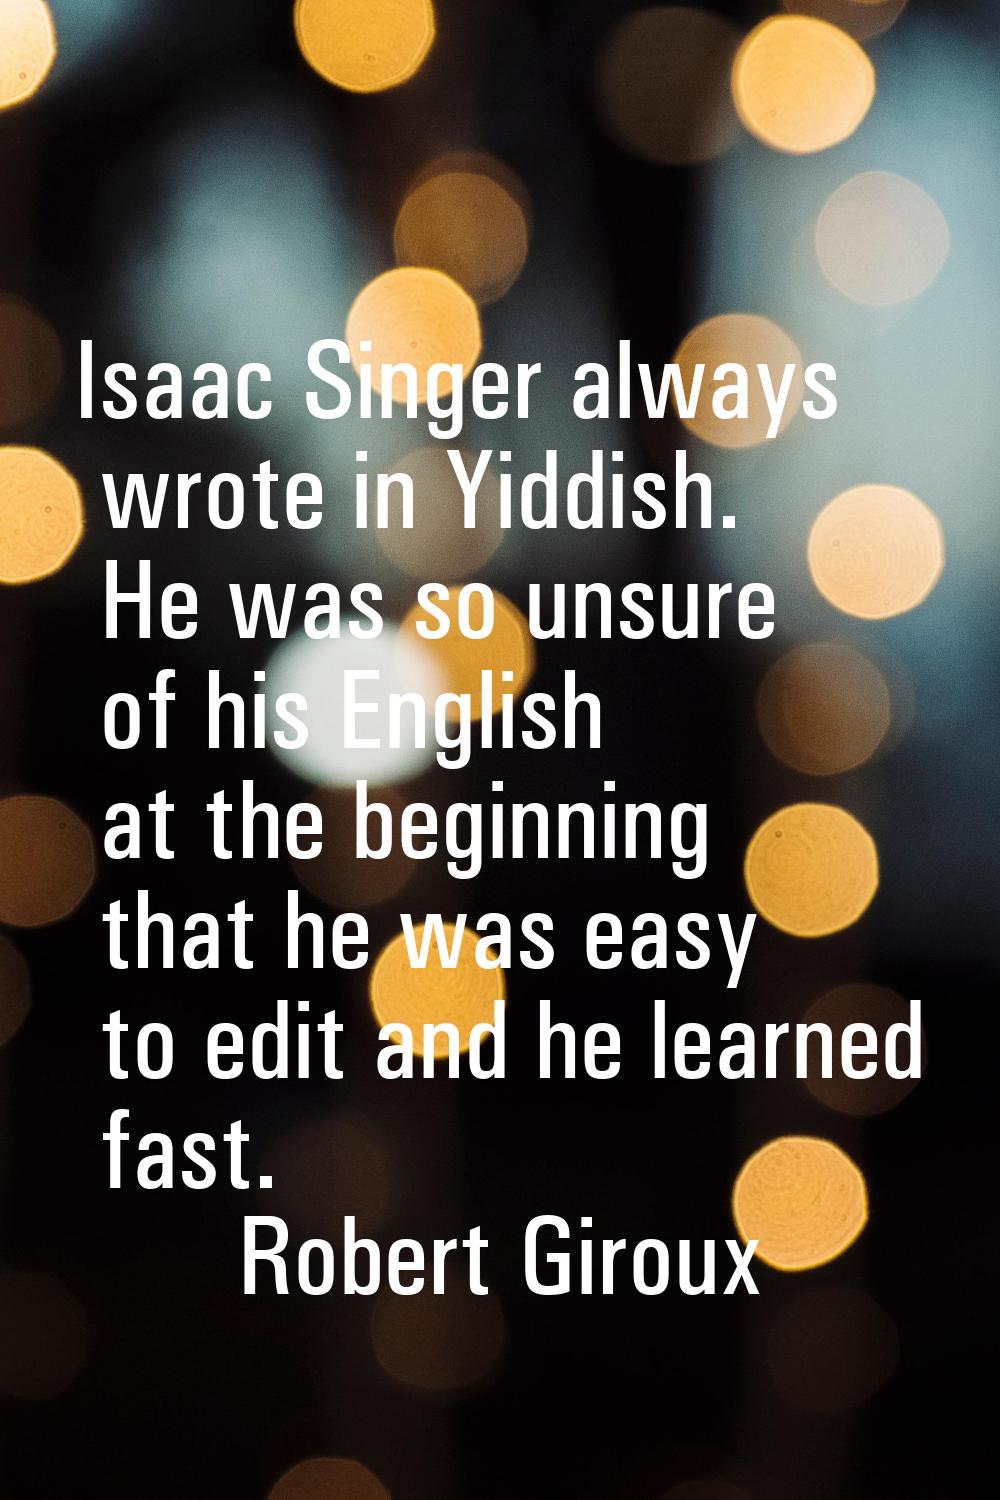 Isaac Singer always wrote in Yiddish. He was so unsure of his English at the beginning that he was 